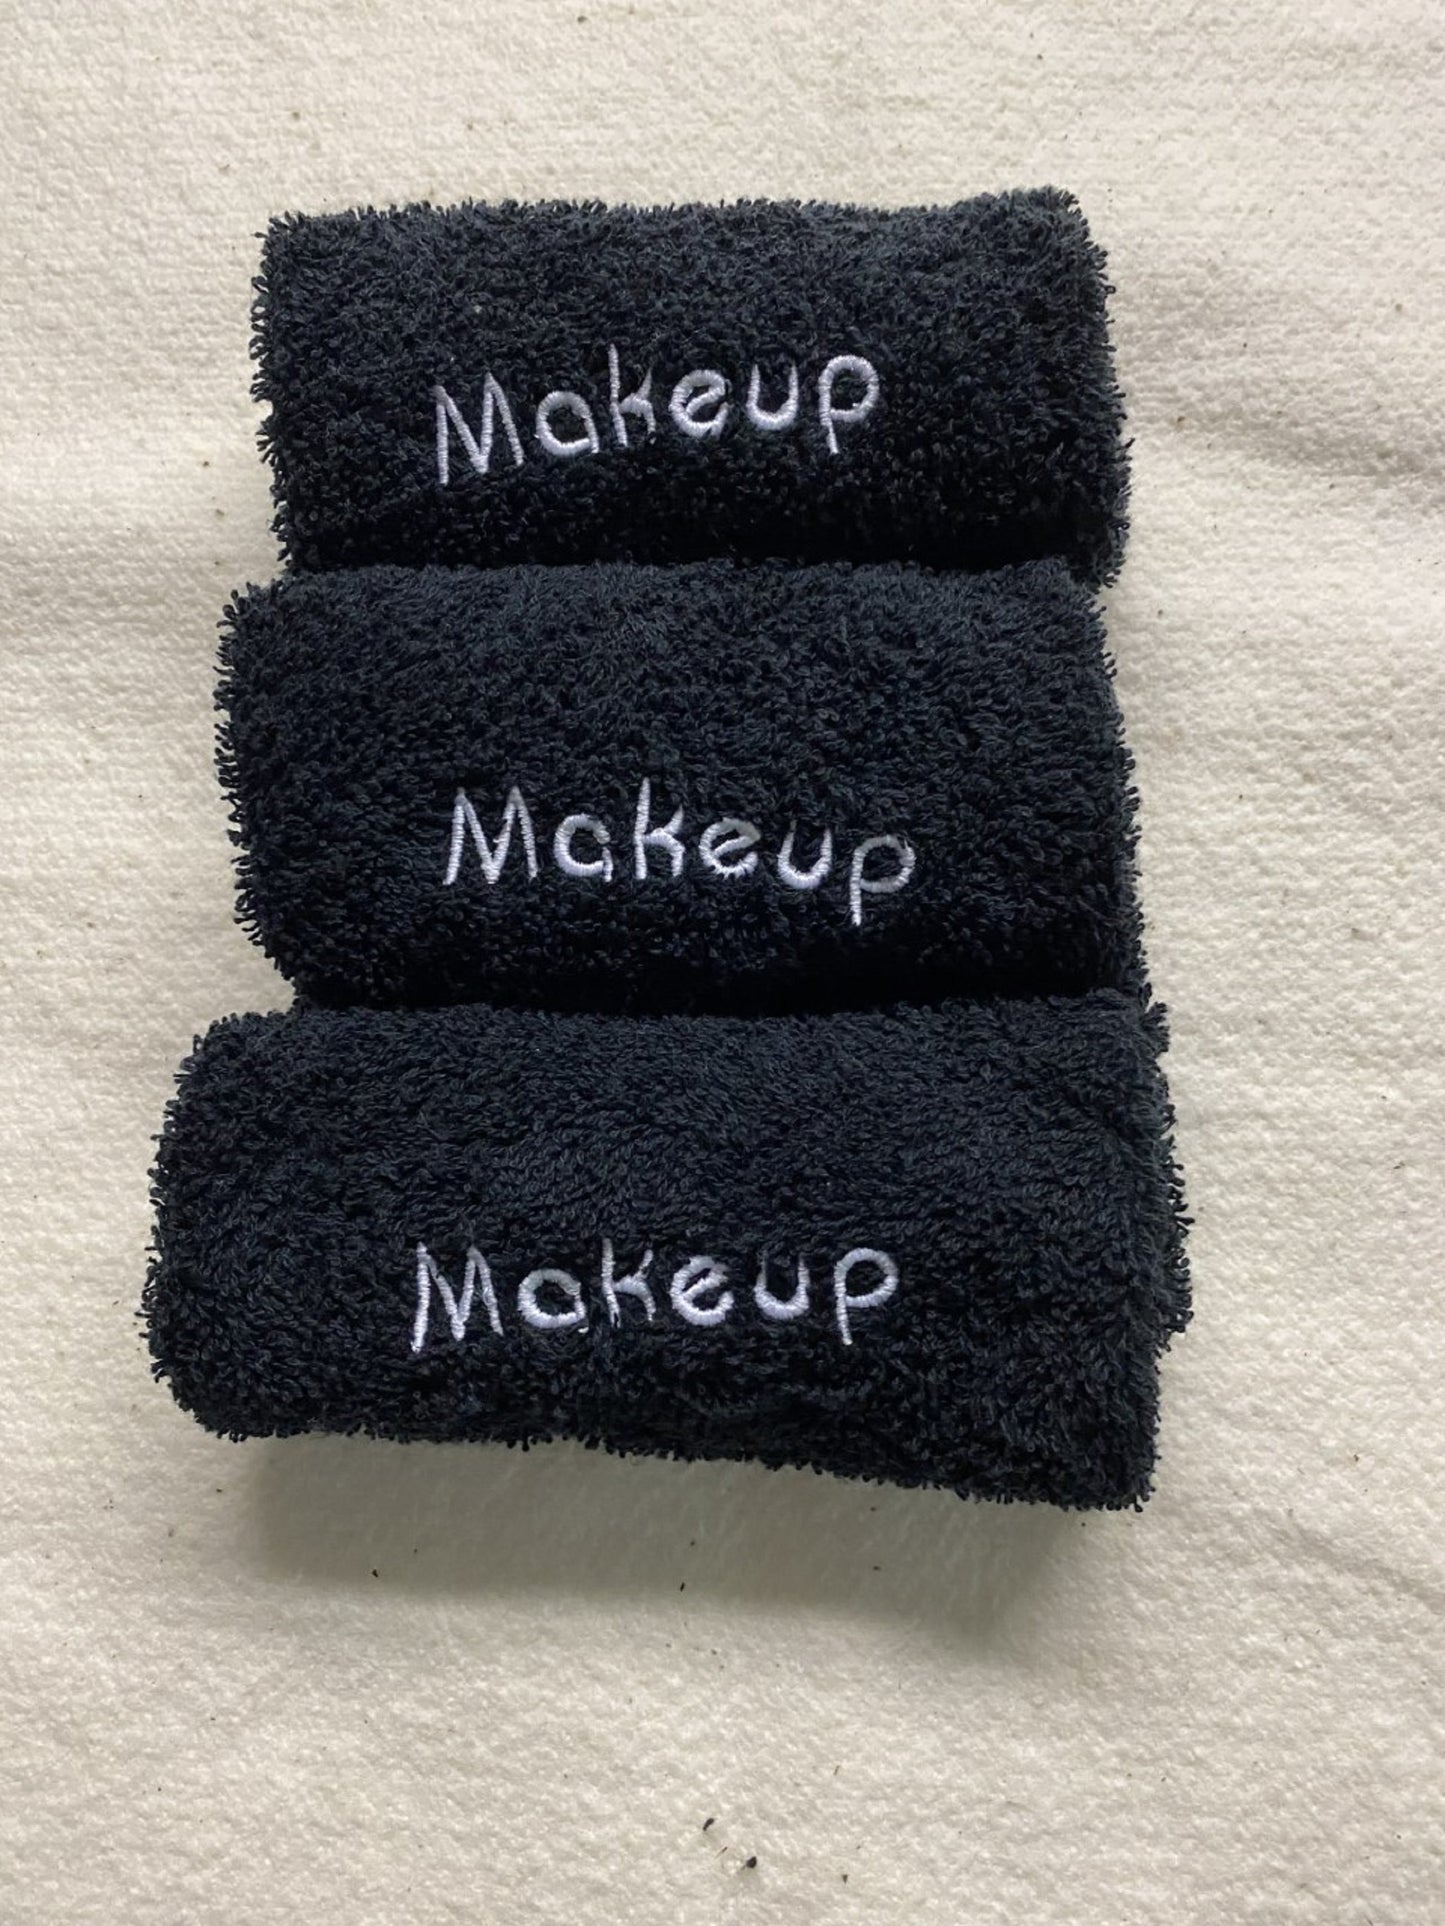 Black Washcloth with Makeup Embroidered-3 Washcloths